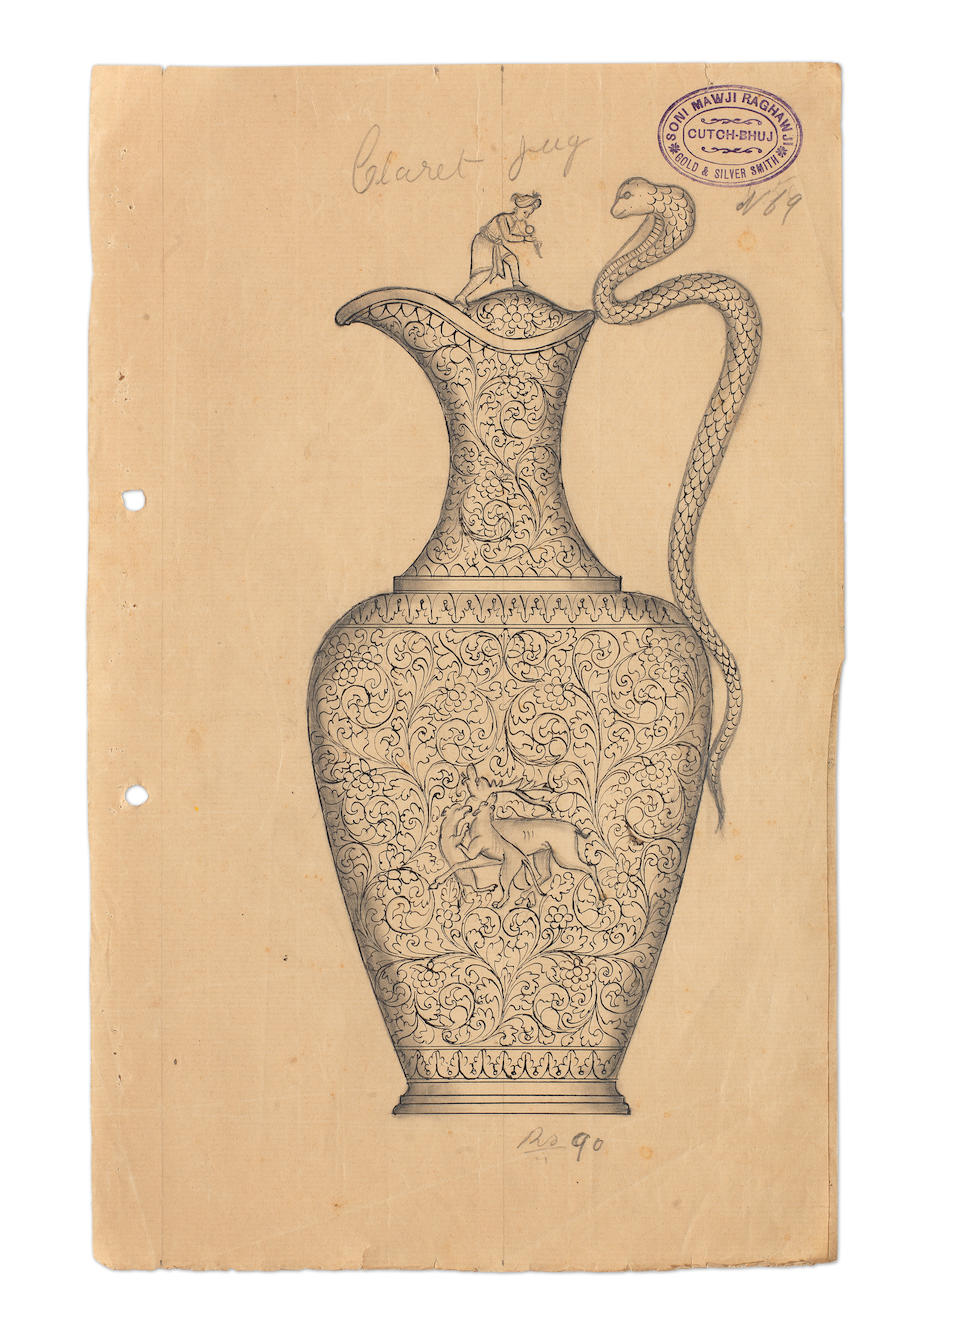 A group of designs and sketches by the workshop of Raghavji Mawji Bhuj, late 19th Century